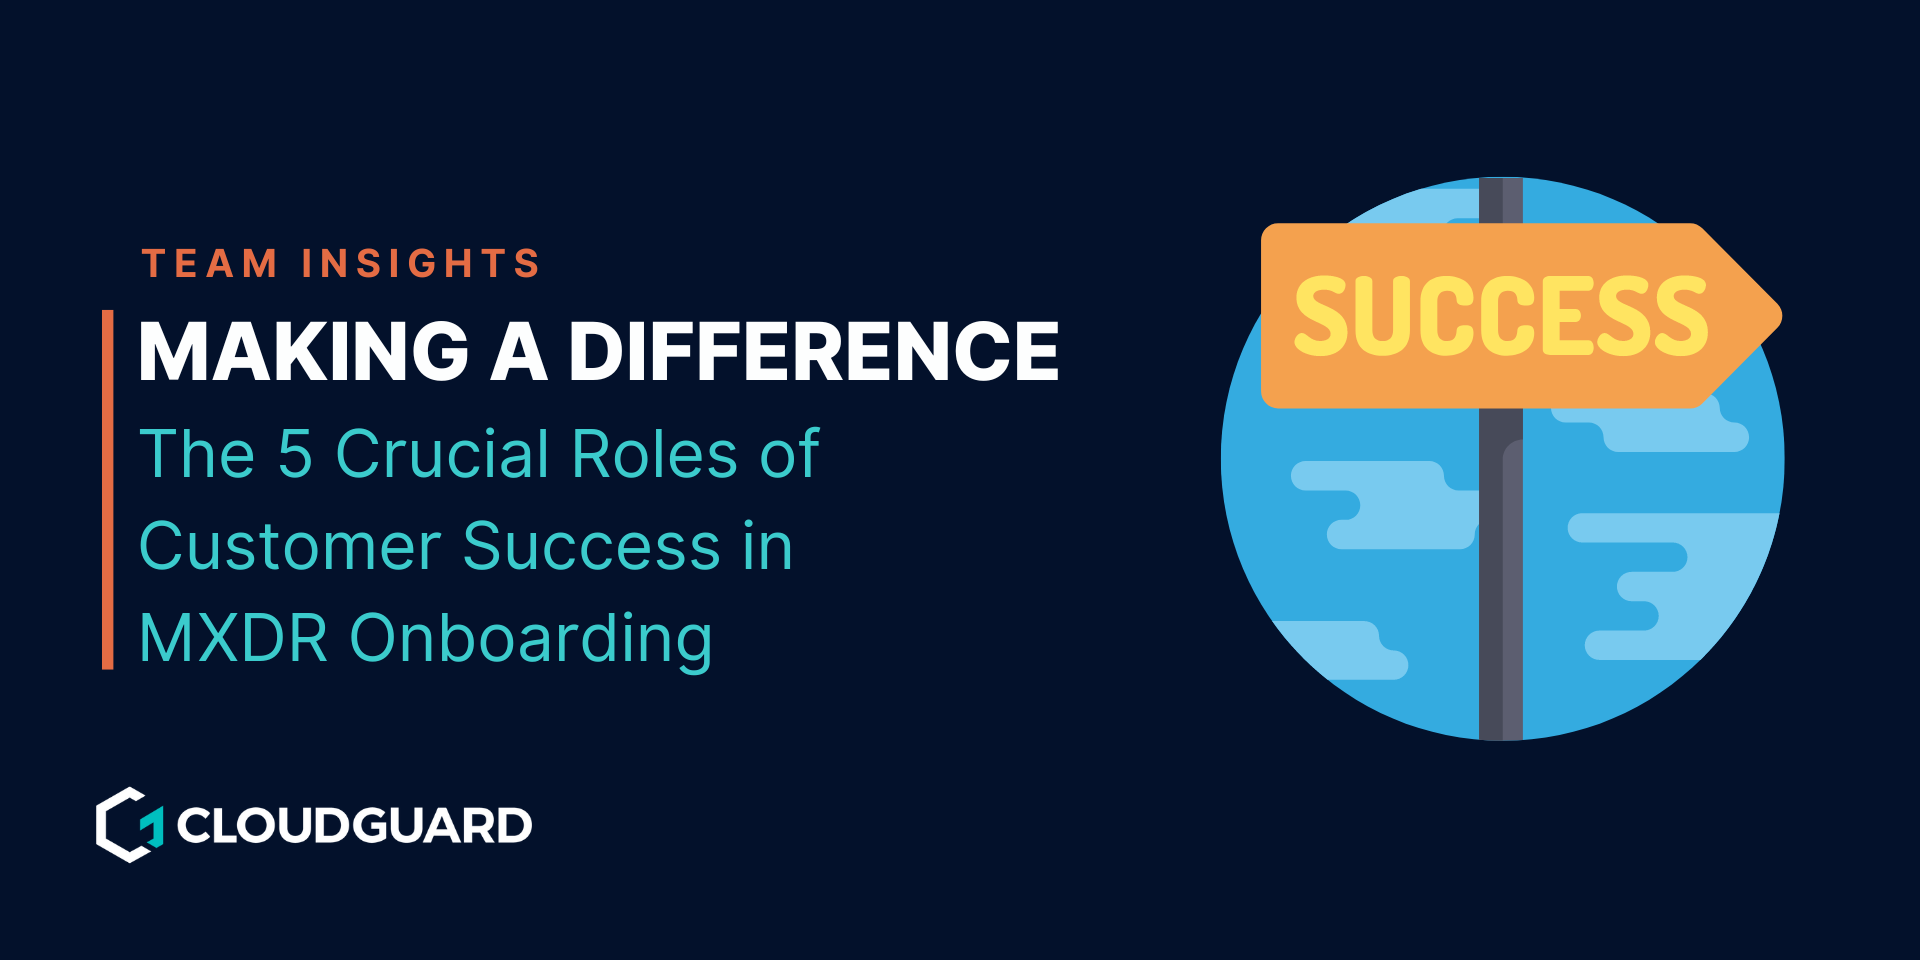 the 5 crucial roles of customer success in mxdr onboarding